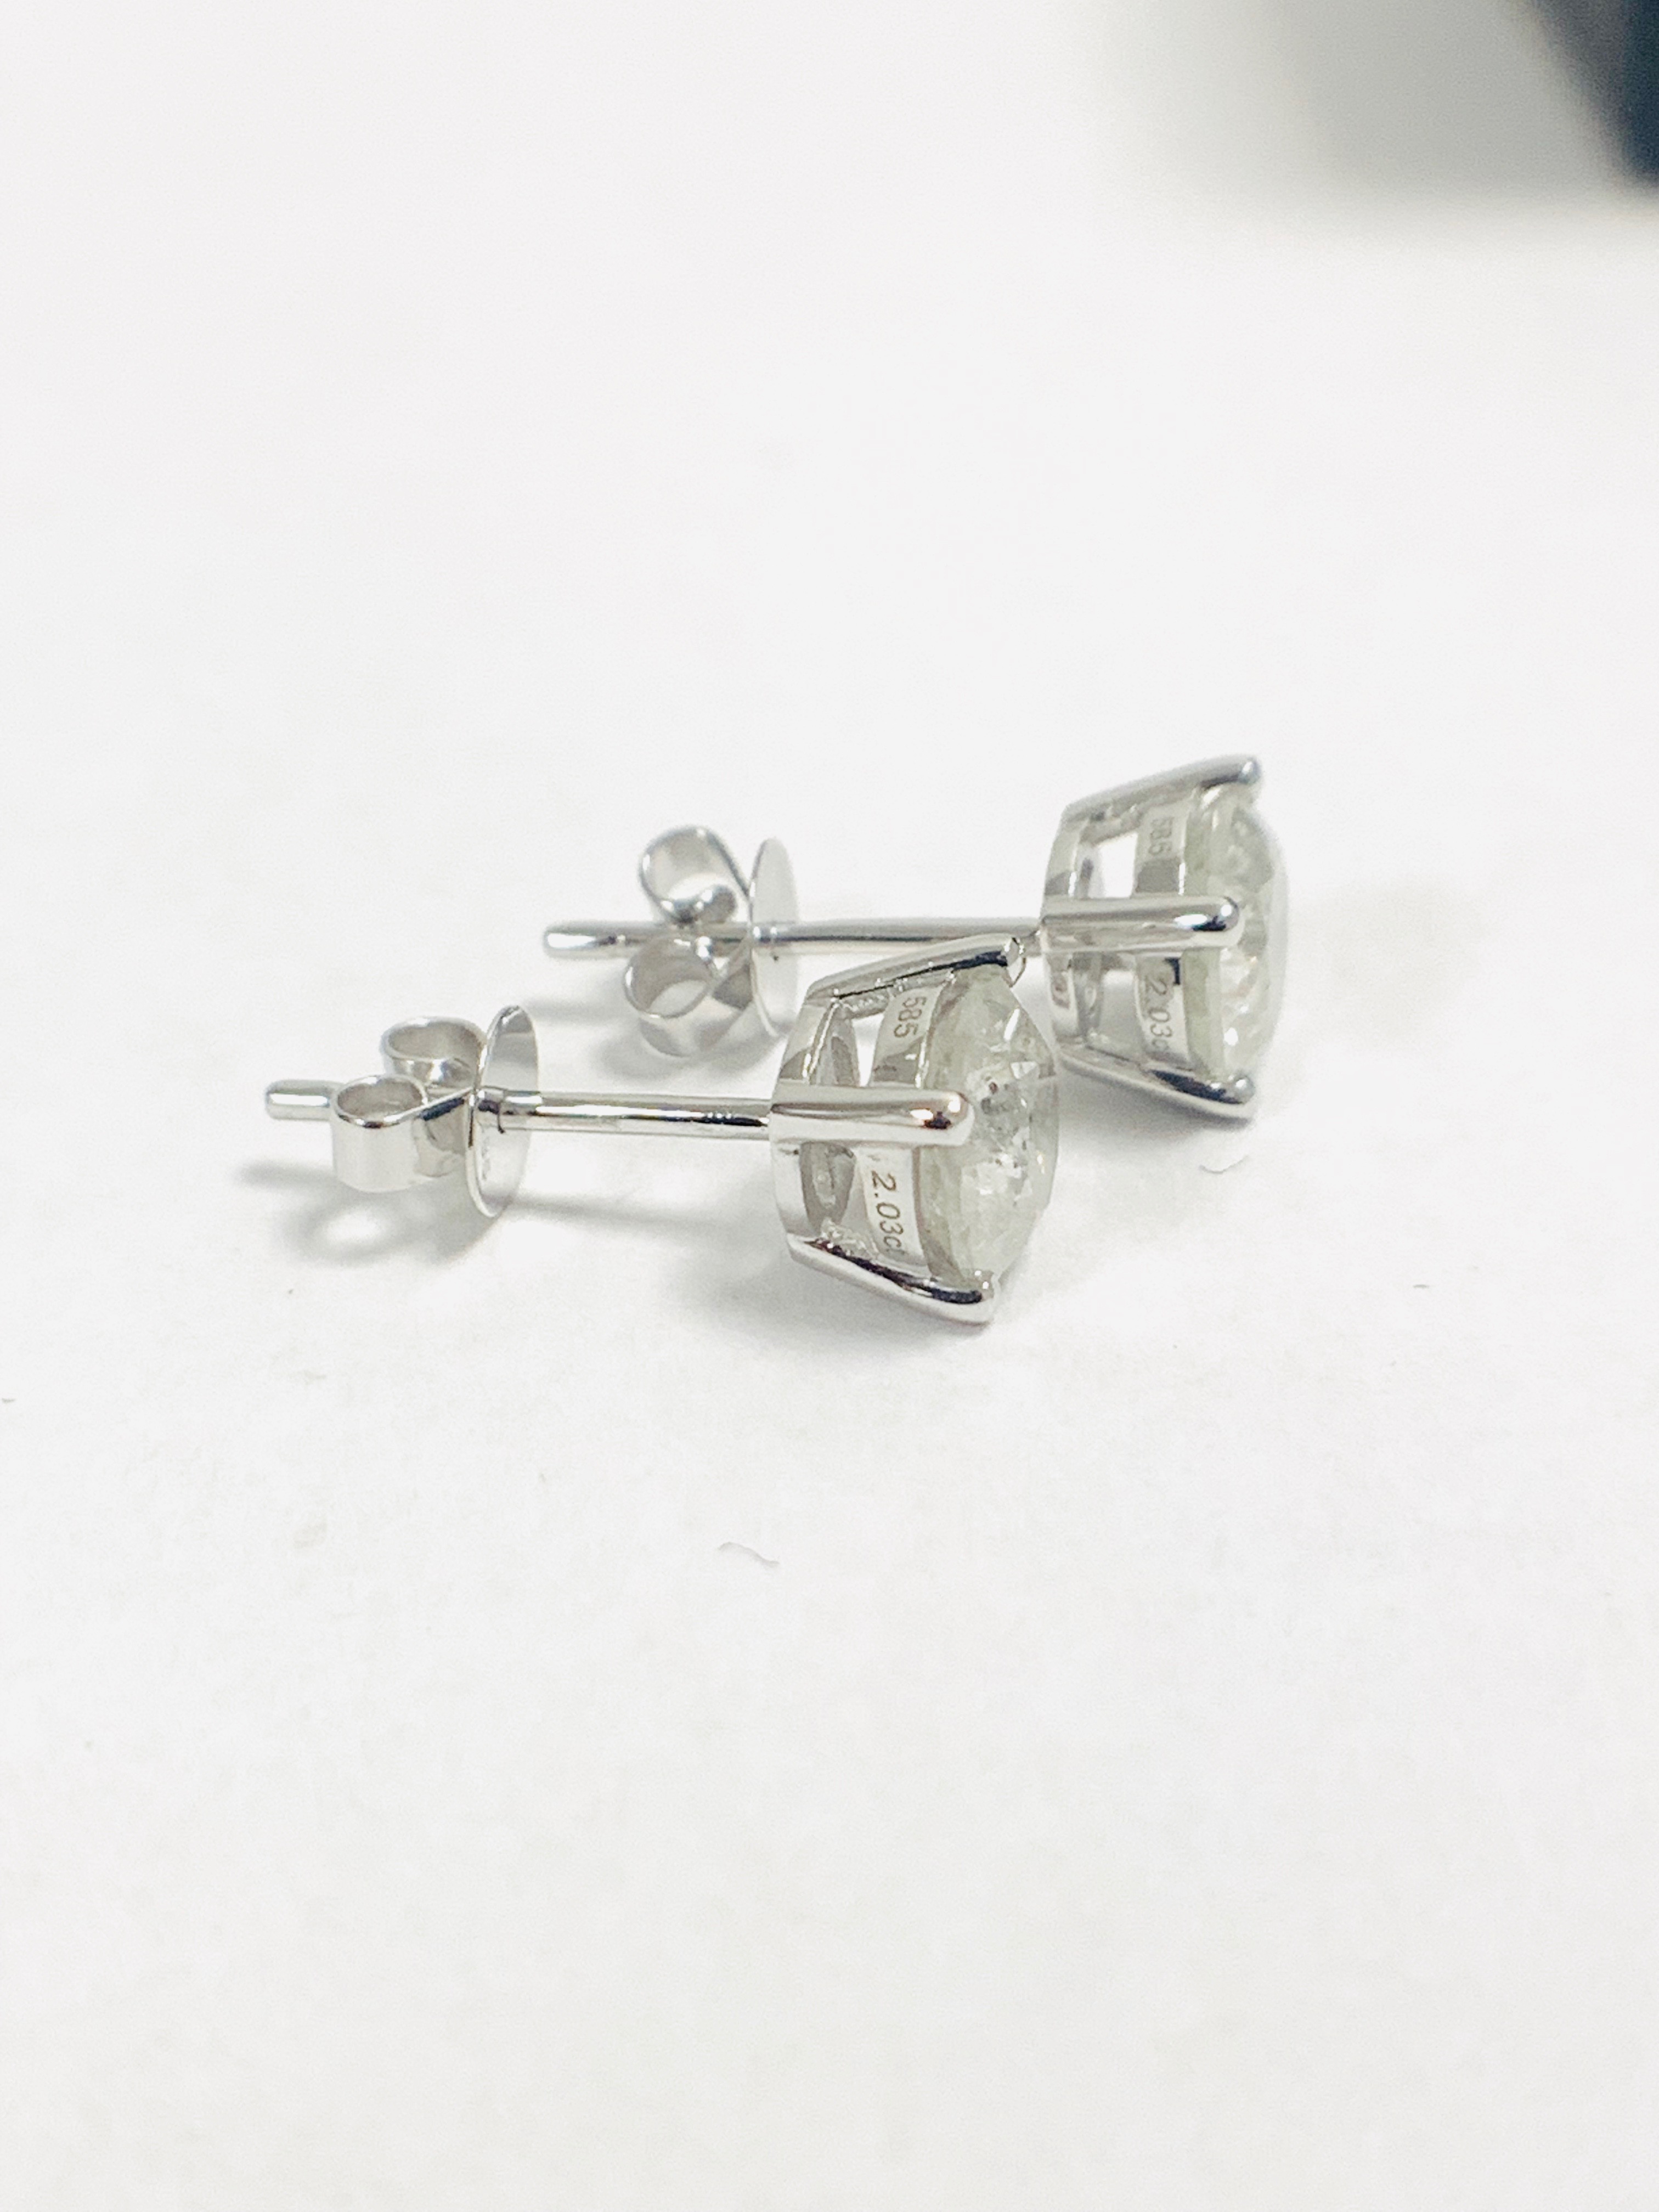 14ct White Gold Diamond stud earrings featuring, 2 round brilliant cut Diamonds (2.03ct TDW), 4-claw - Image 7 of 10